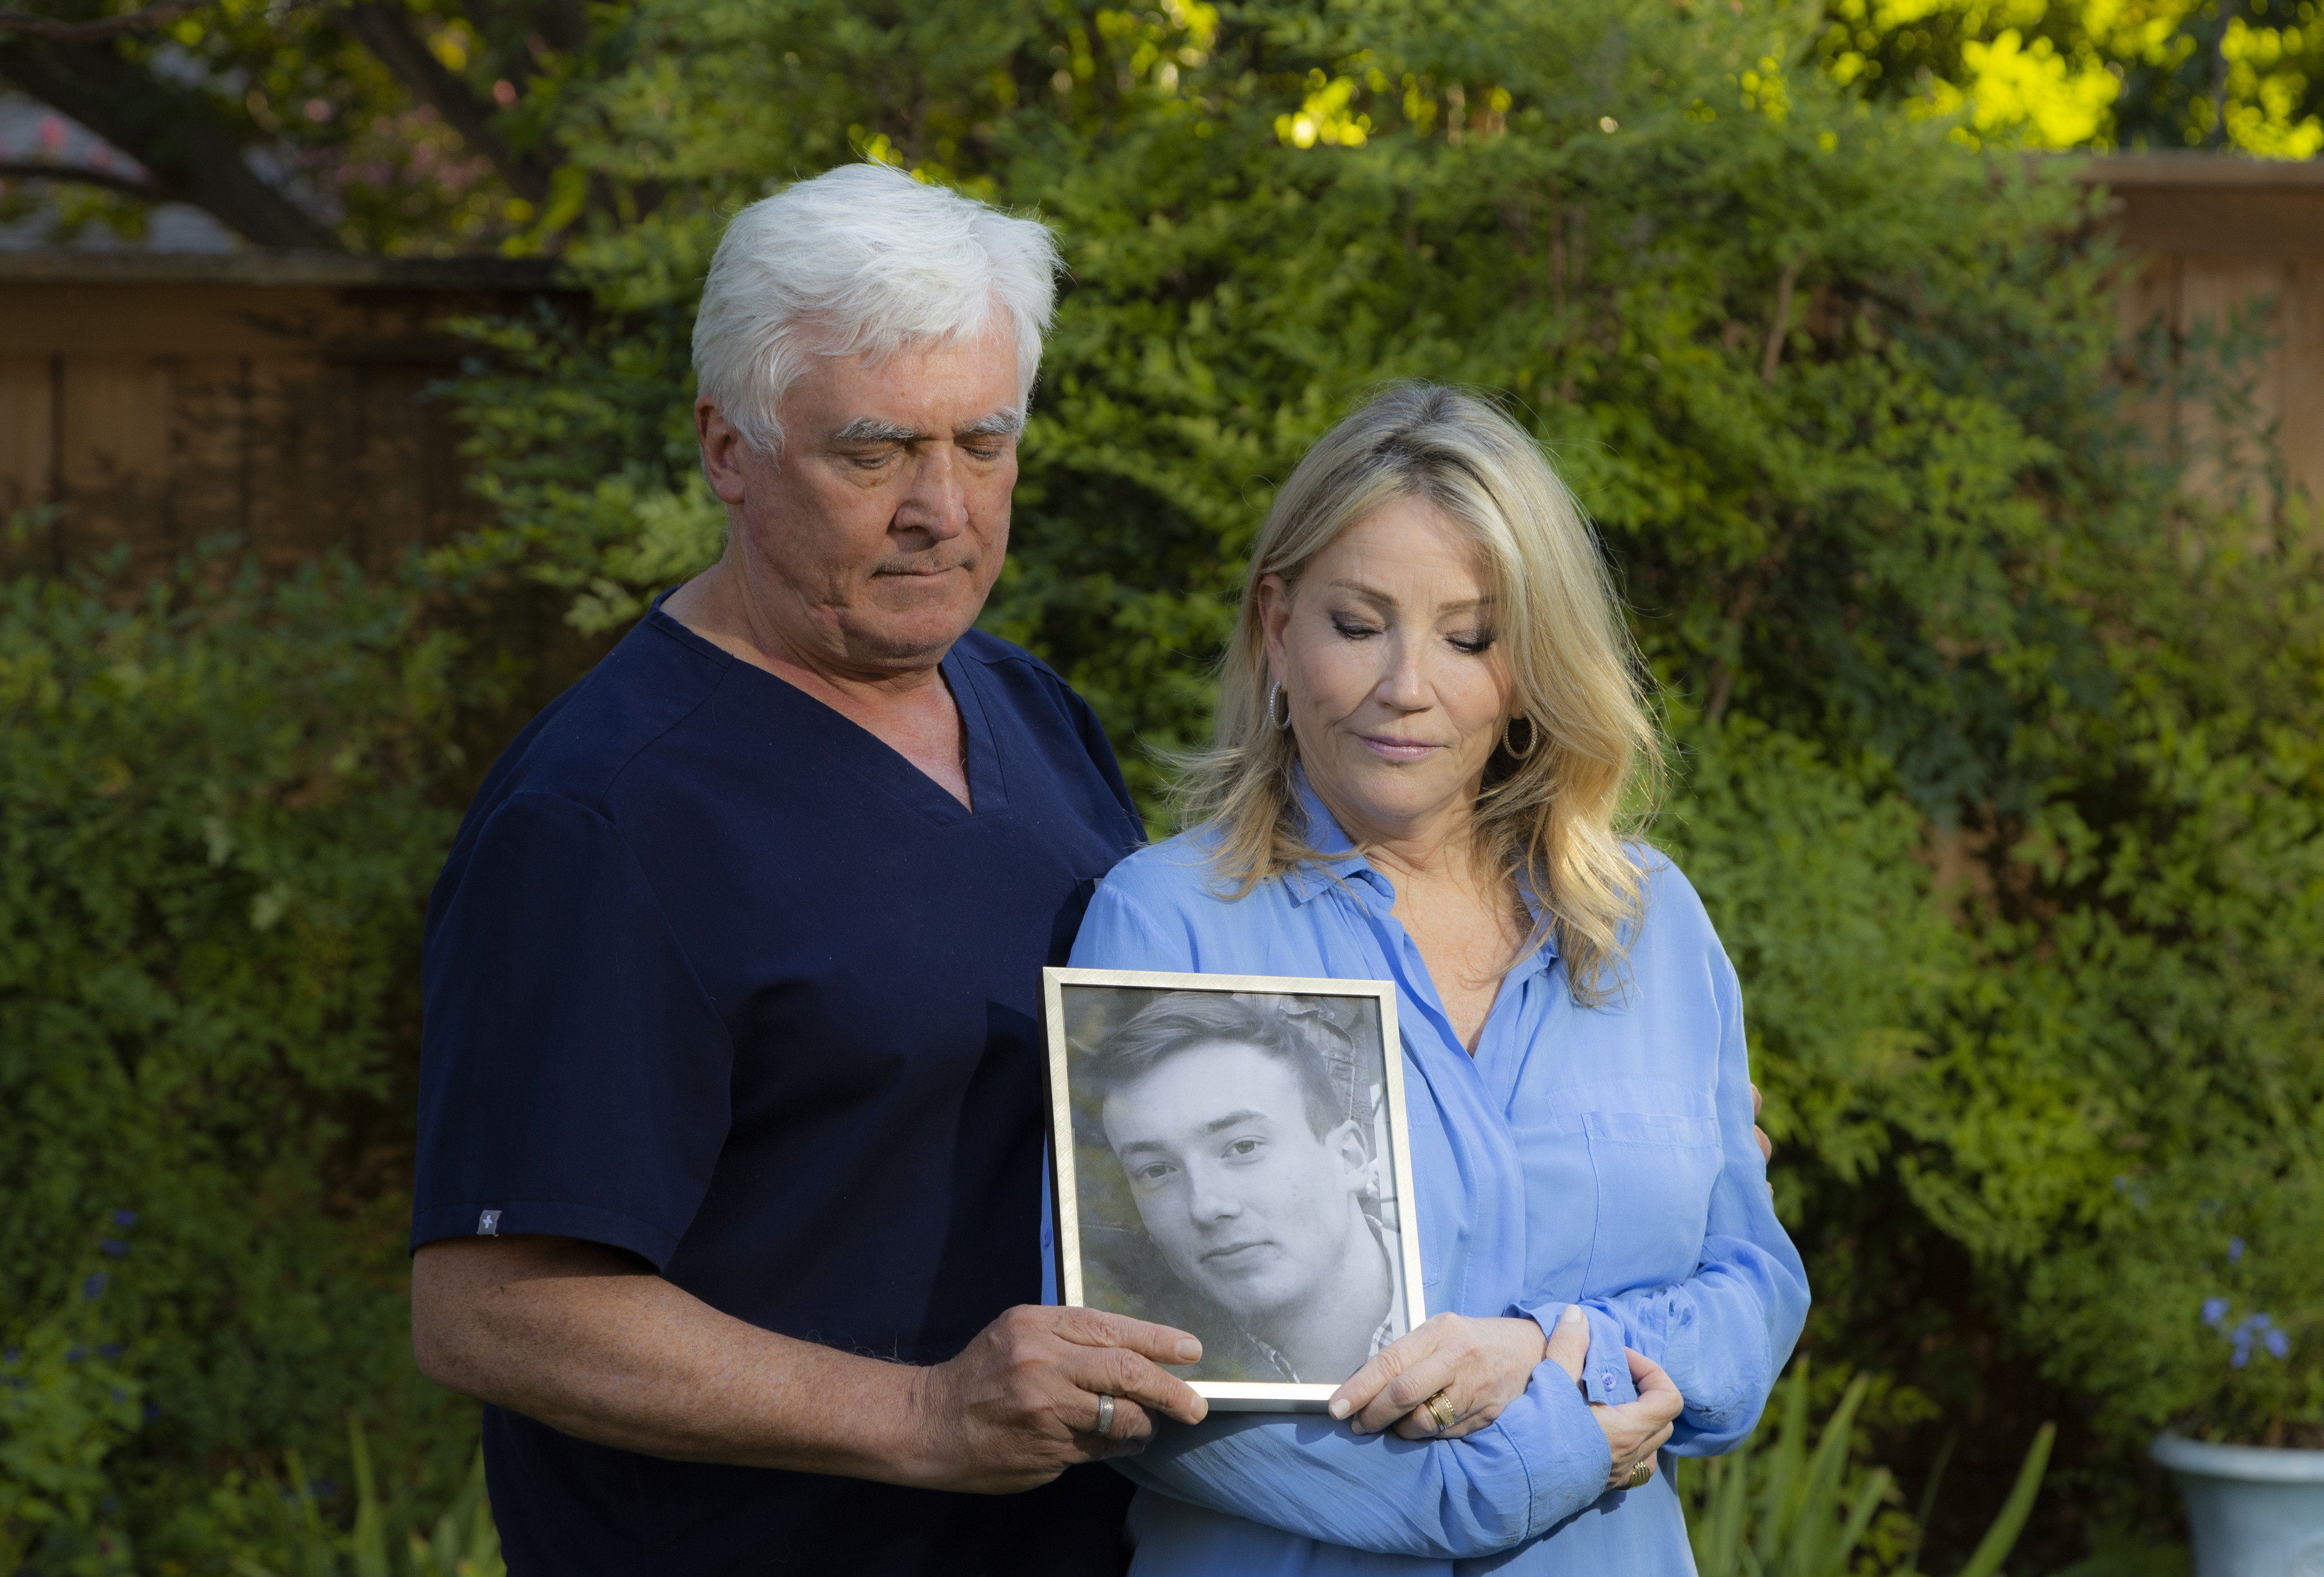 It's hard': Family grieves 2 overdose deaths linked to fentanyl